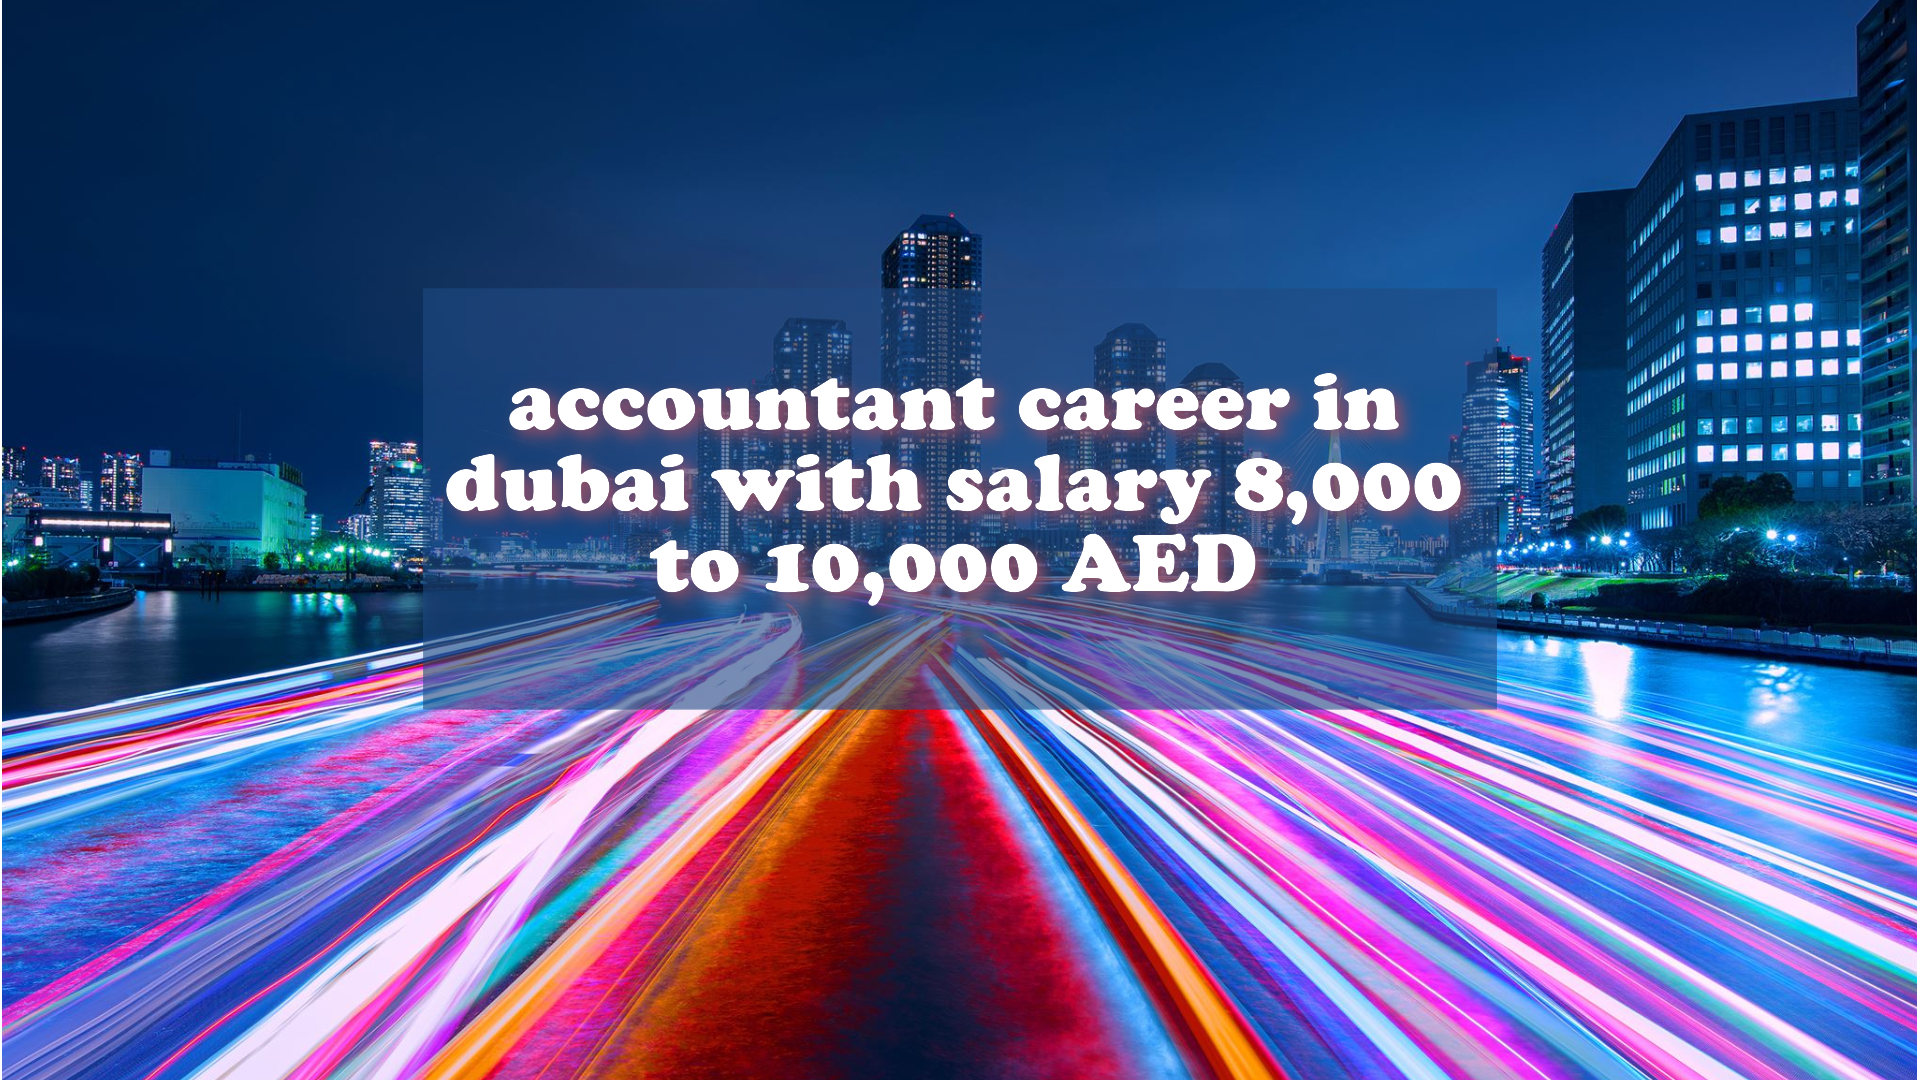 accountant career in dubai with salary 8,000 to 10,000 AED